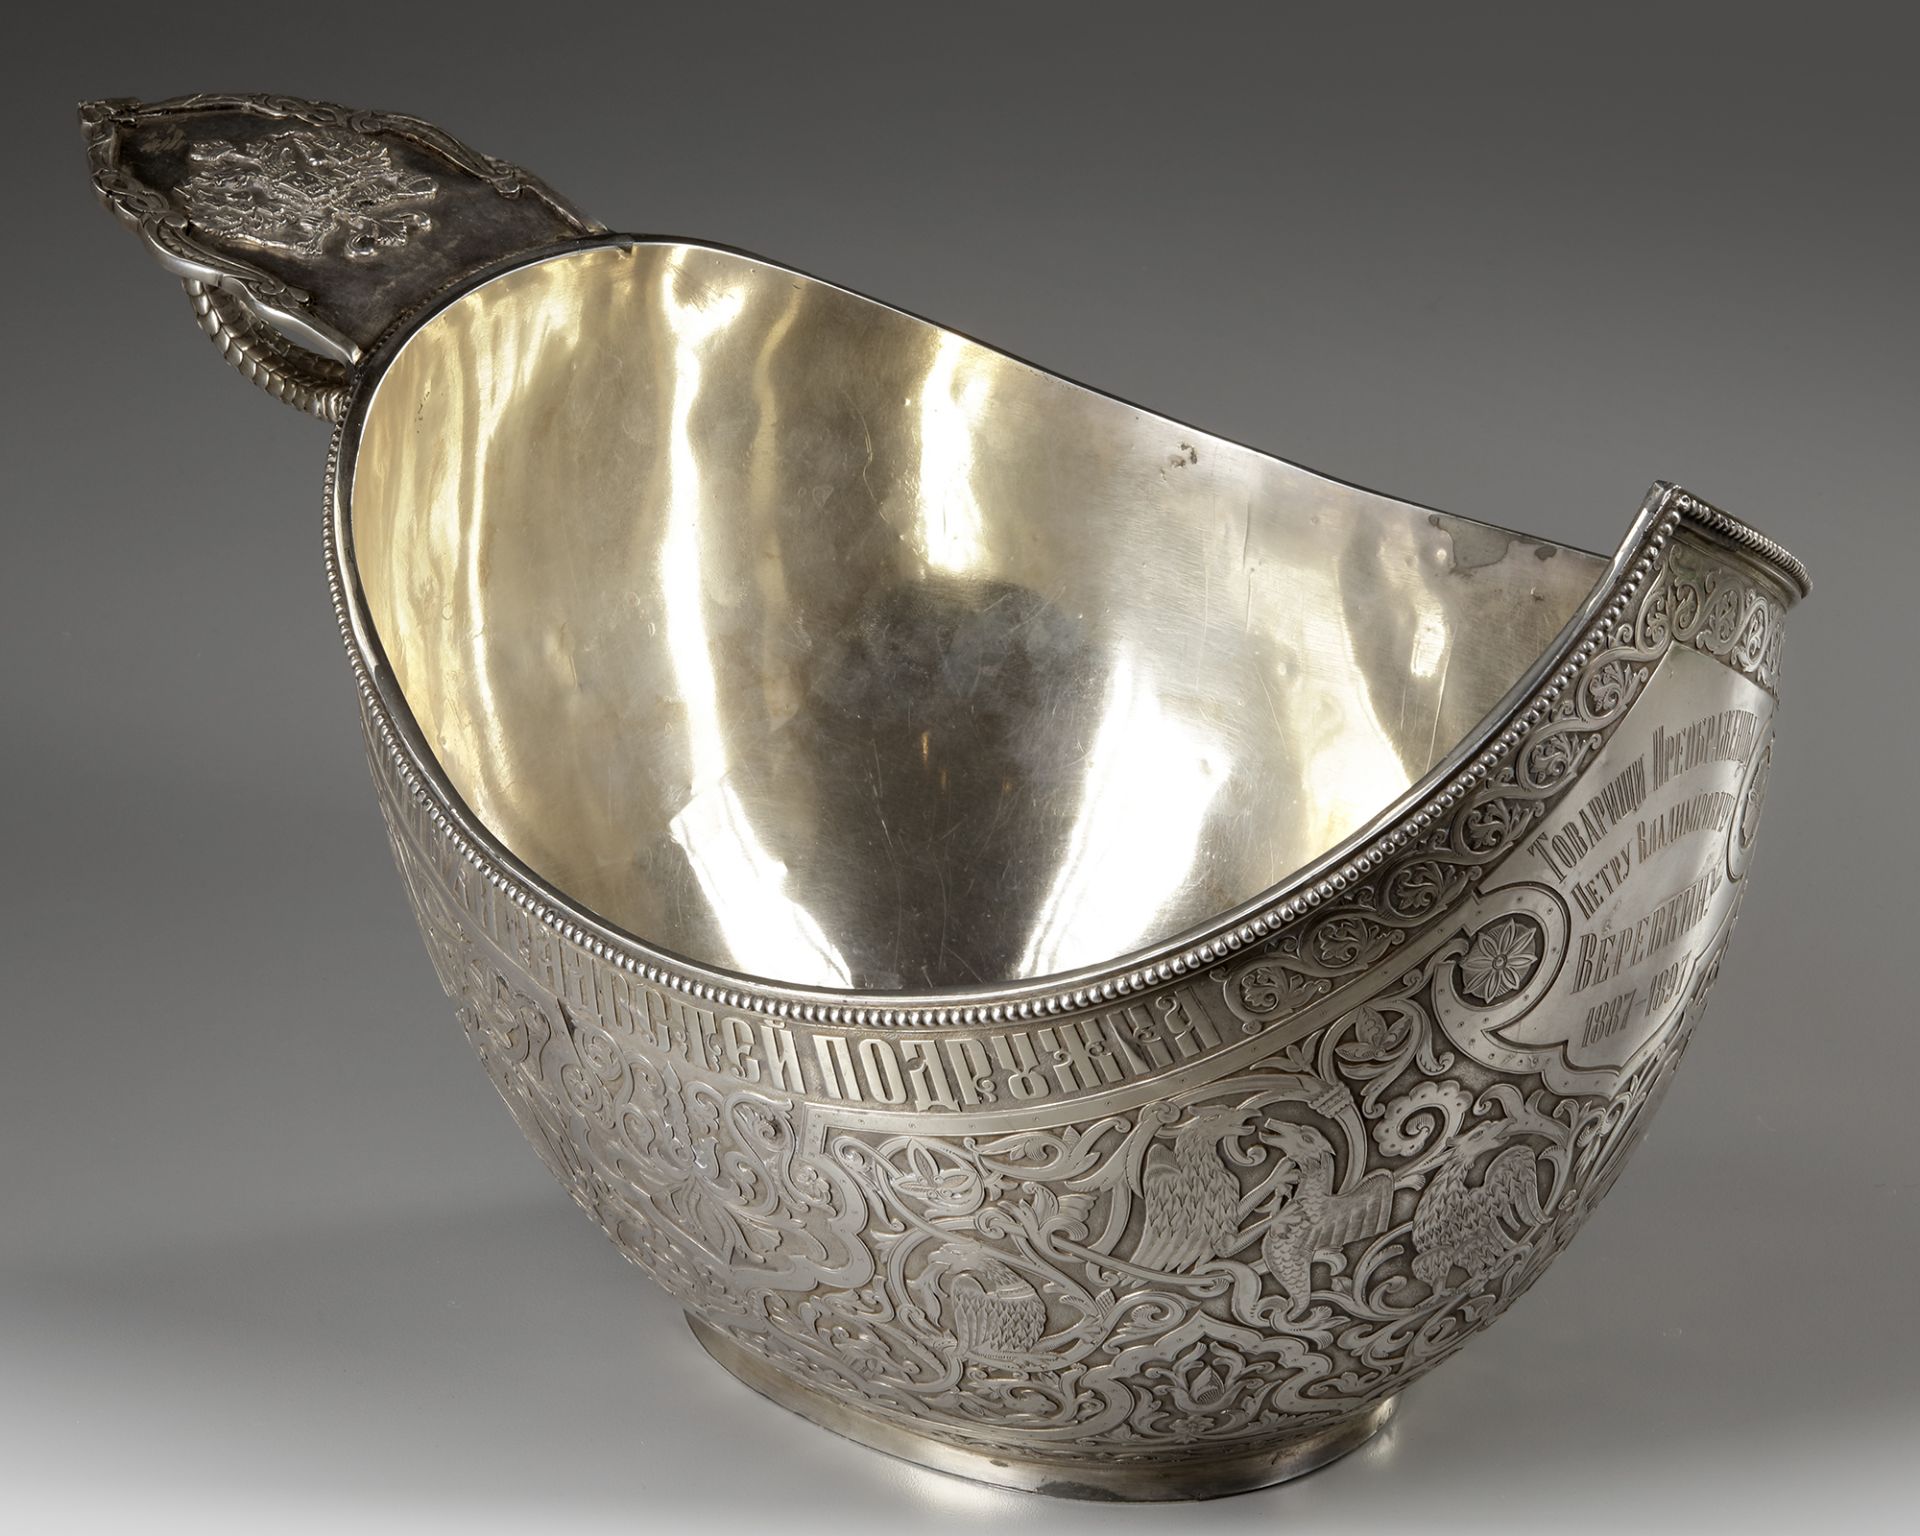 A LARGE RUSSIAN IMPERIAL SILVER KOVSCH BOWL, LATE 19TH CENTURY - Bild 6 aus 8